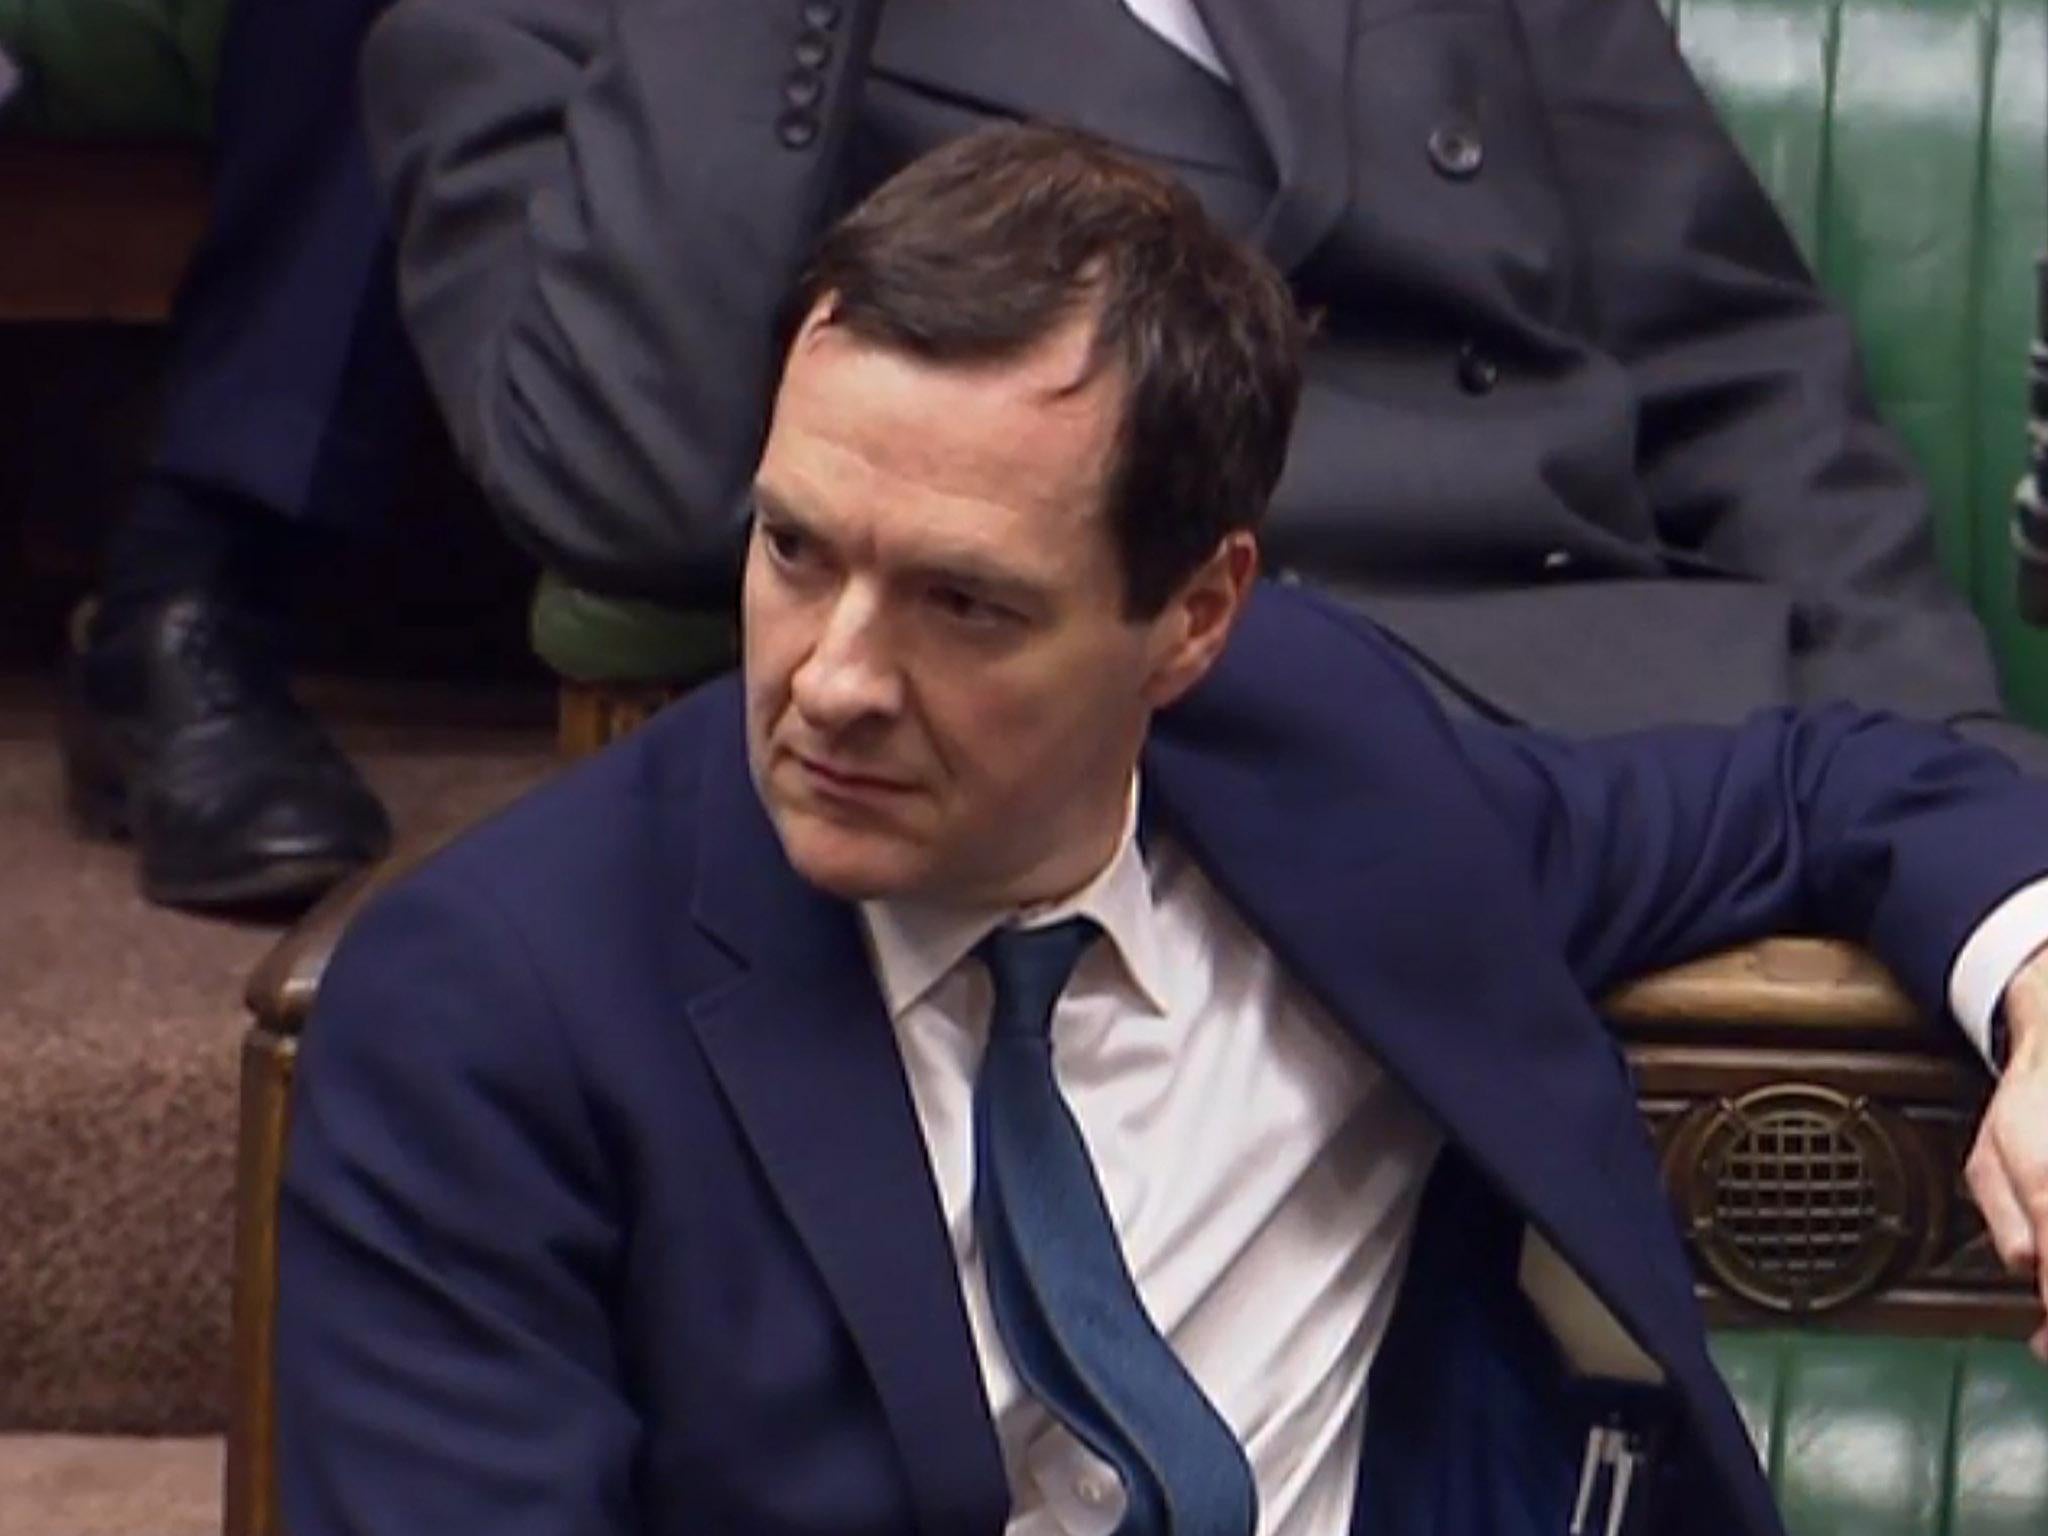 George Osborne has announced his intention to stand down before the general election